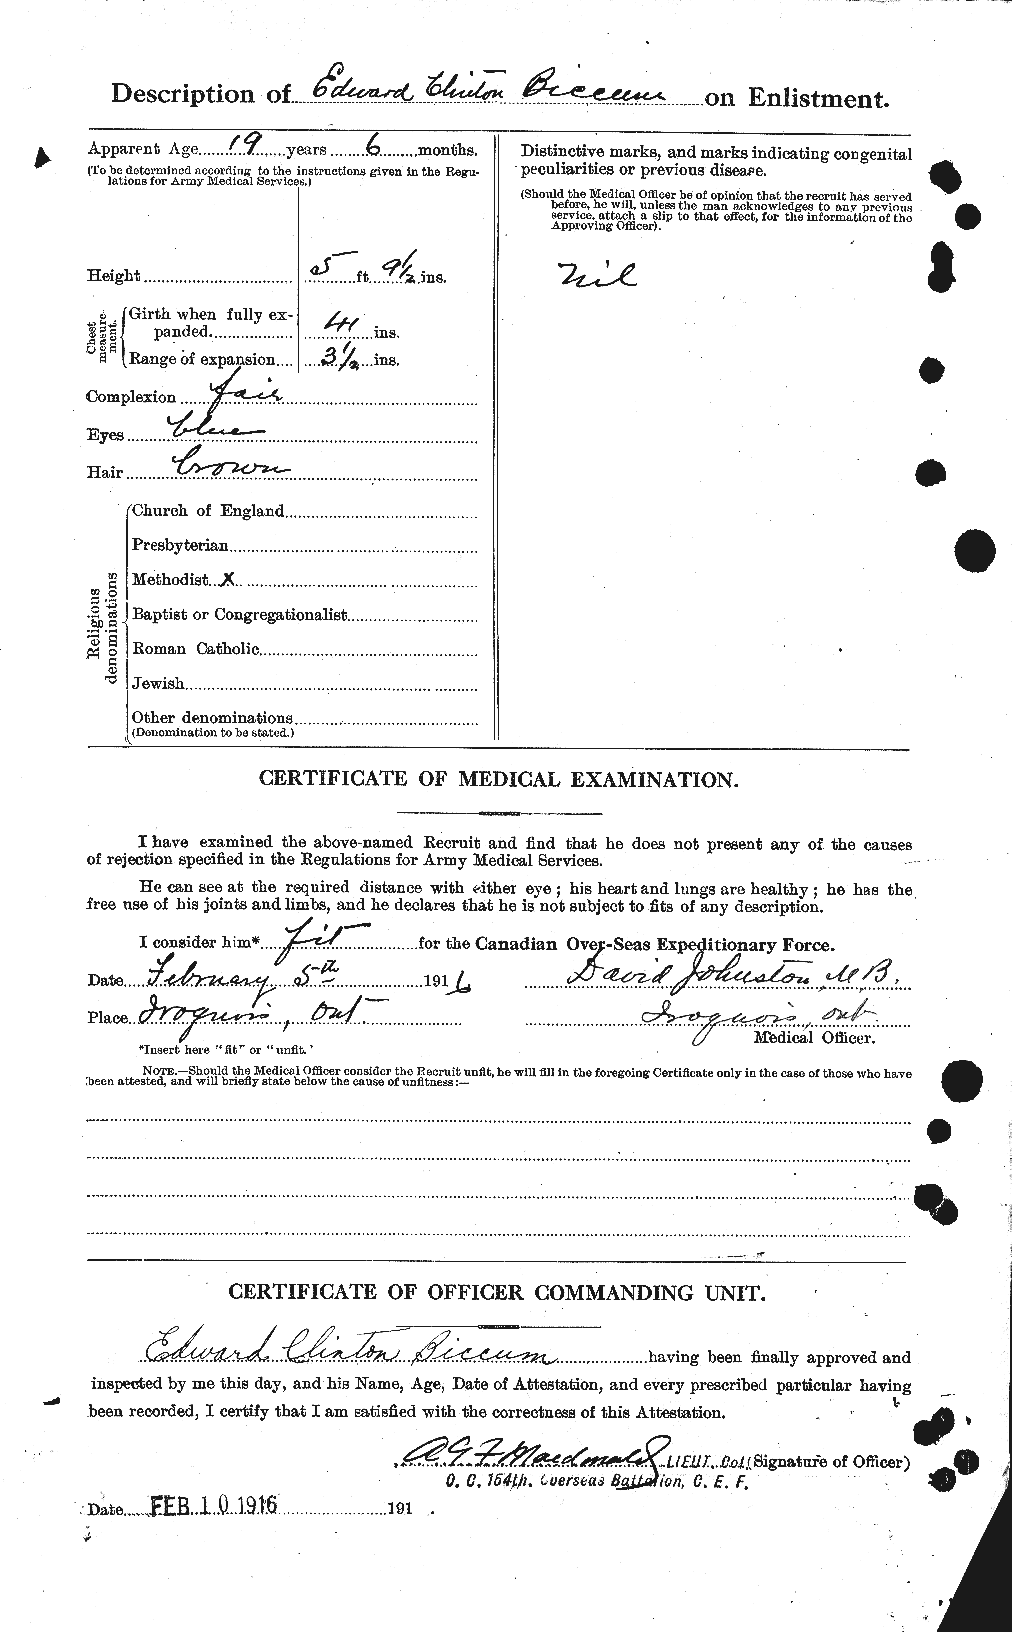 Personnel Records of the First World War - CEF 245007b